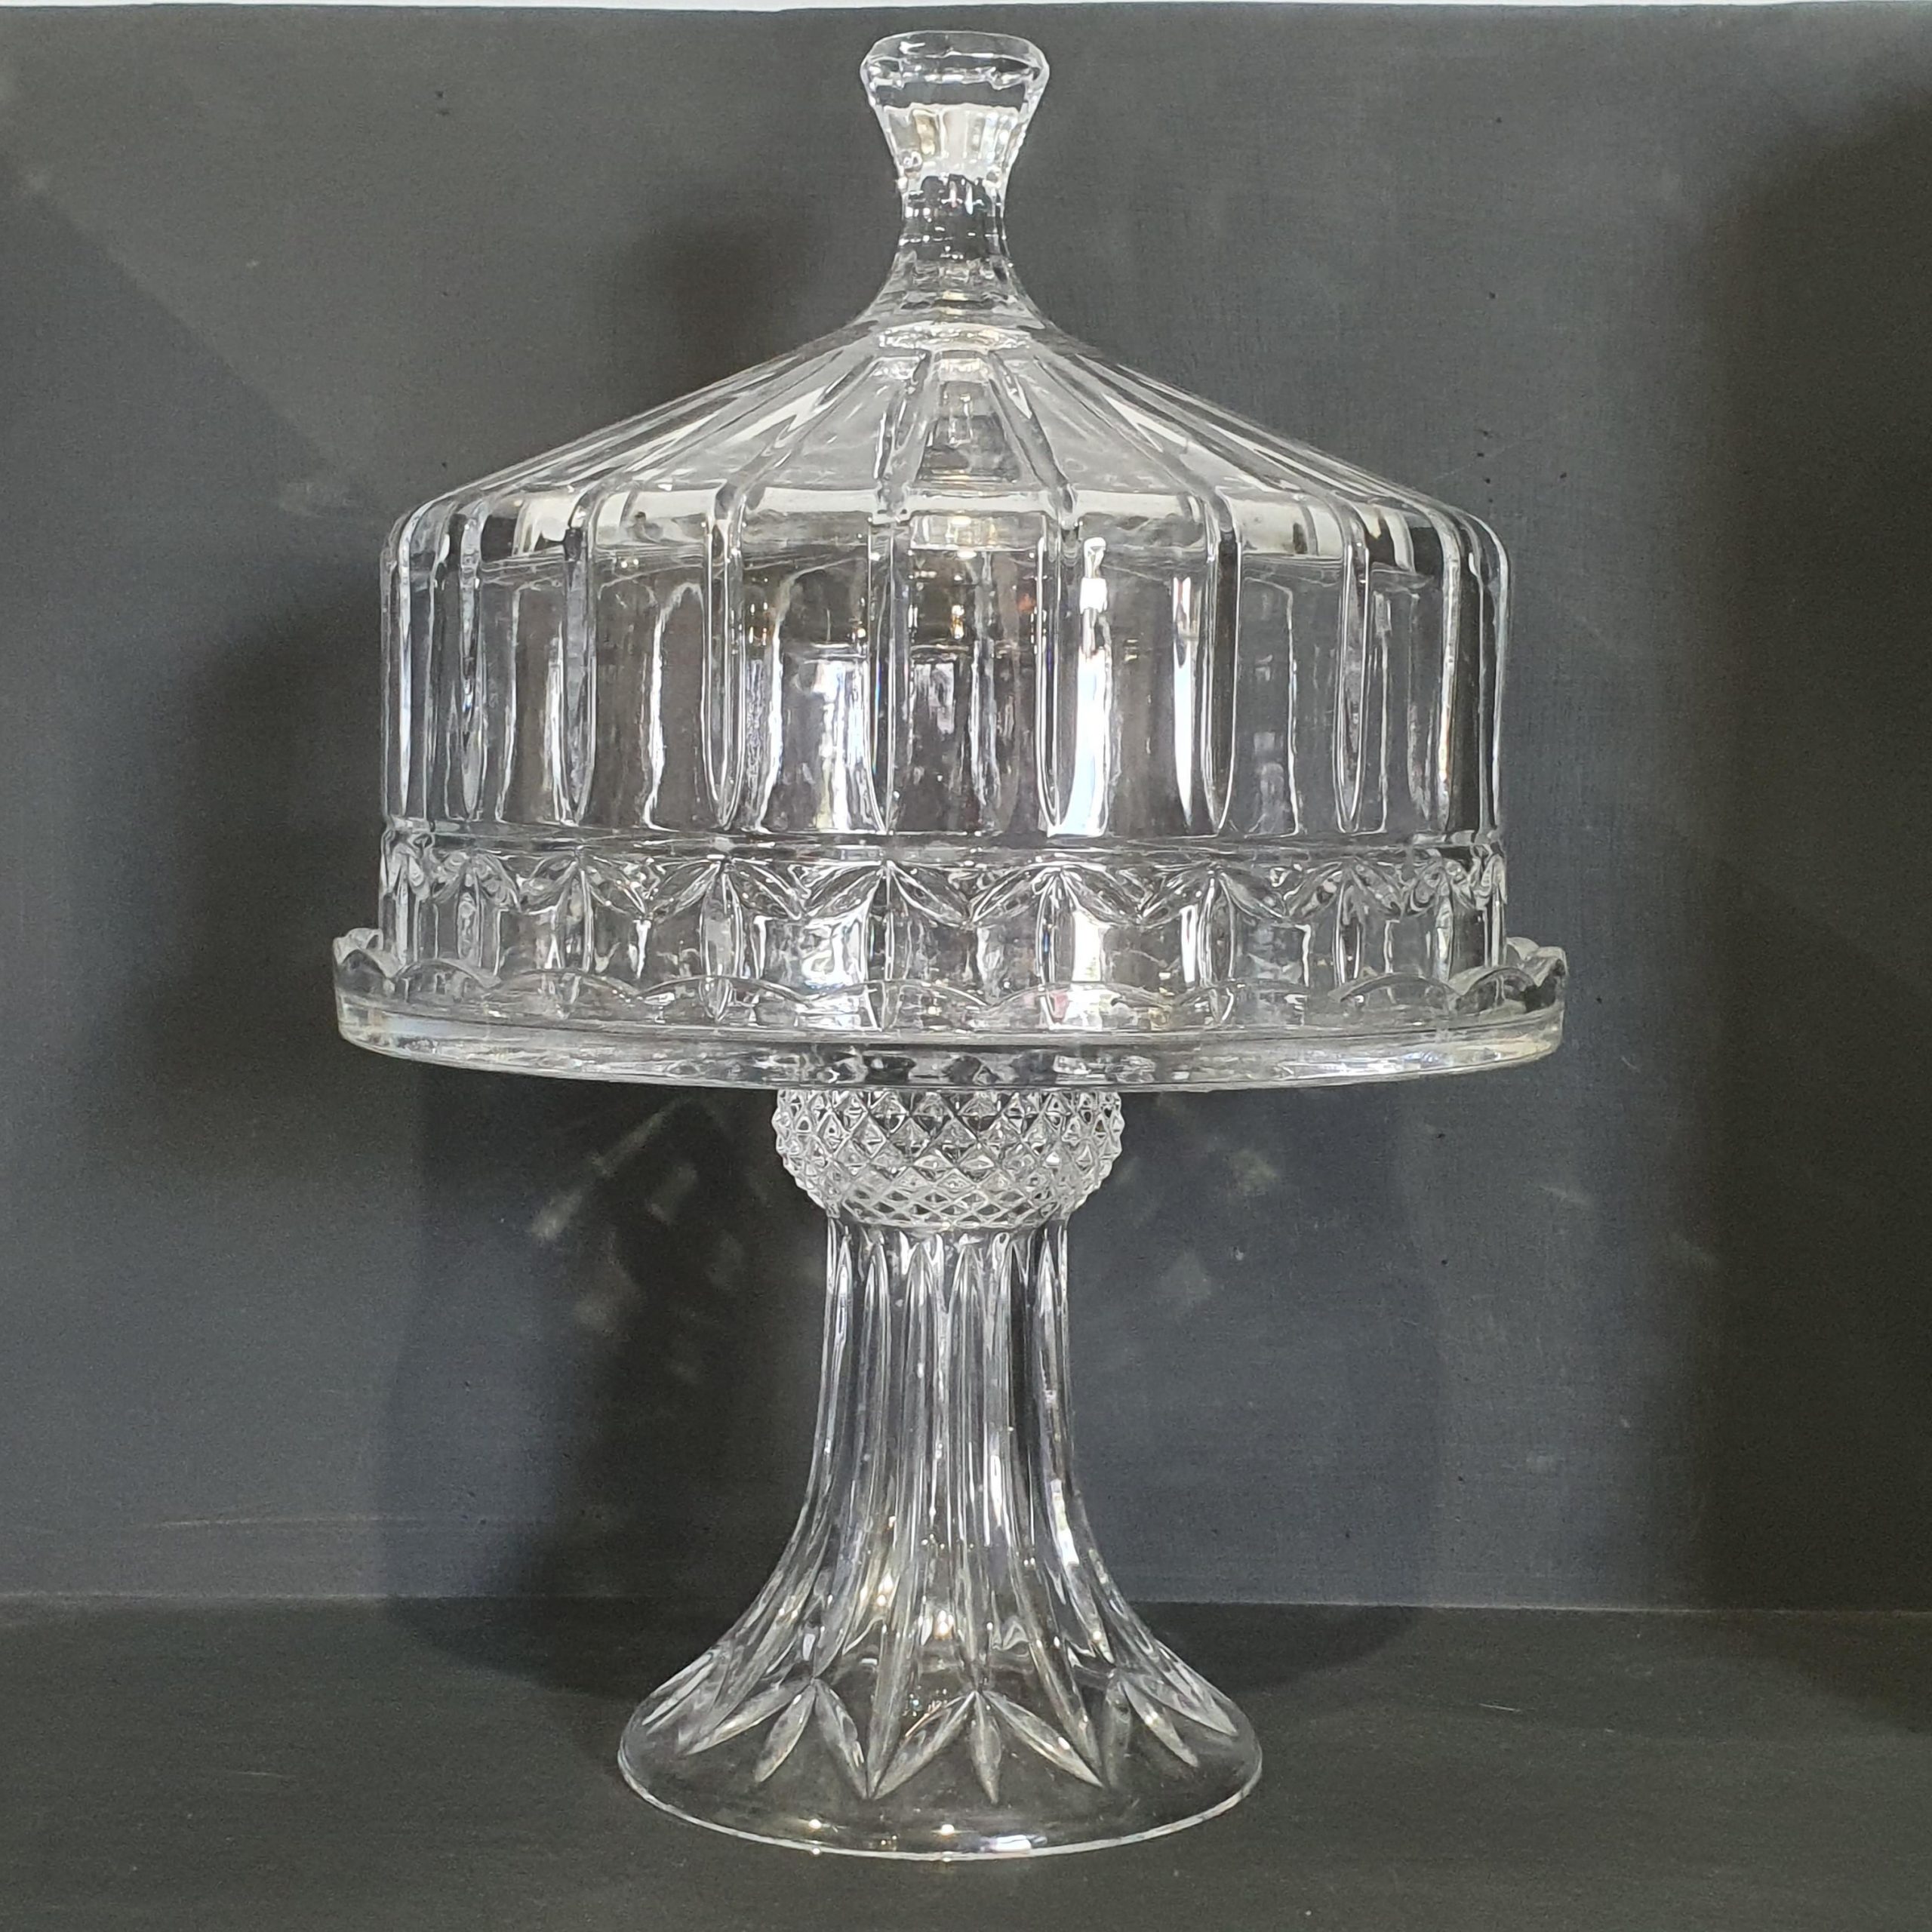 Vintage Glass Cake Stand | Vintage Pressed Glass Small Cake Stand